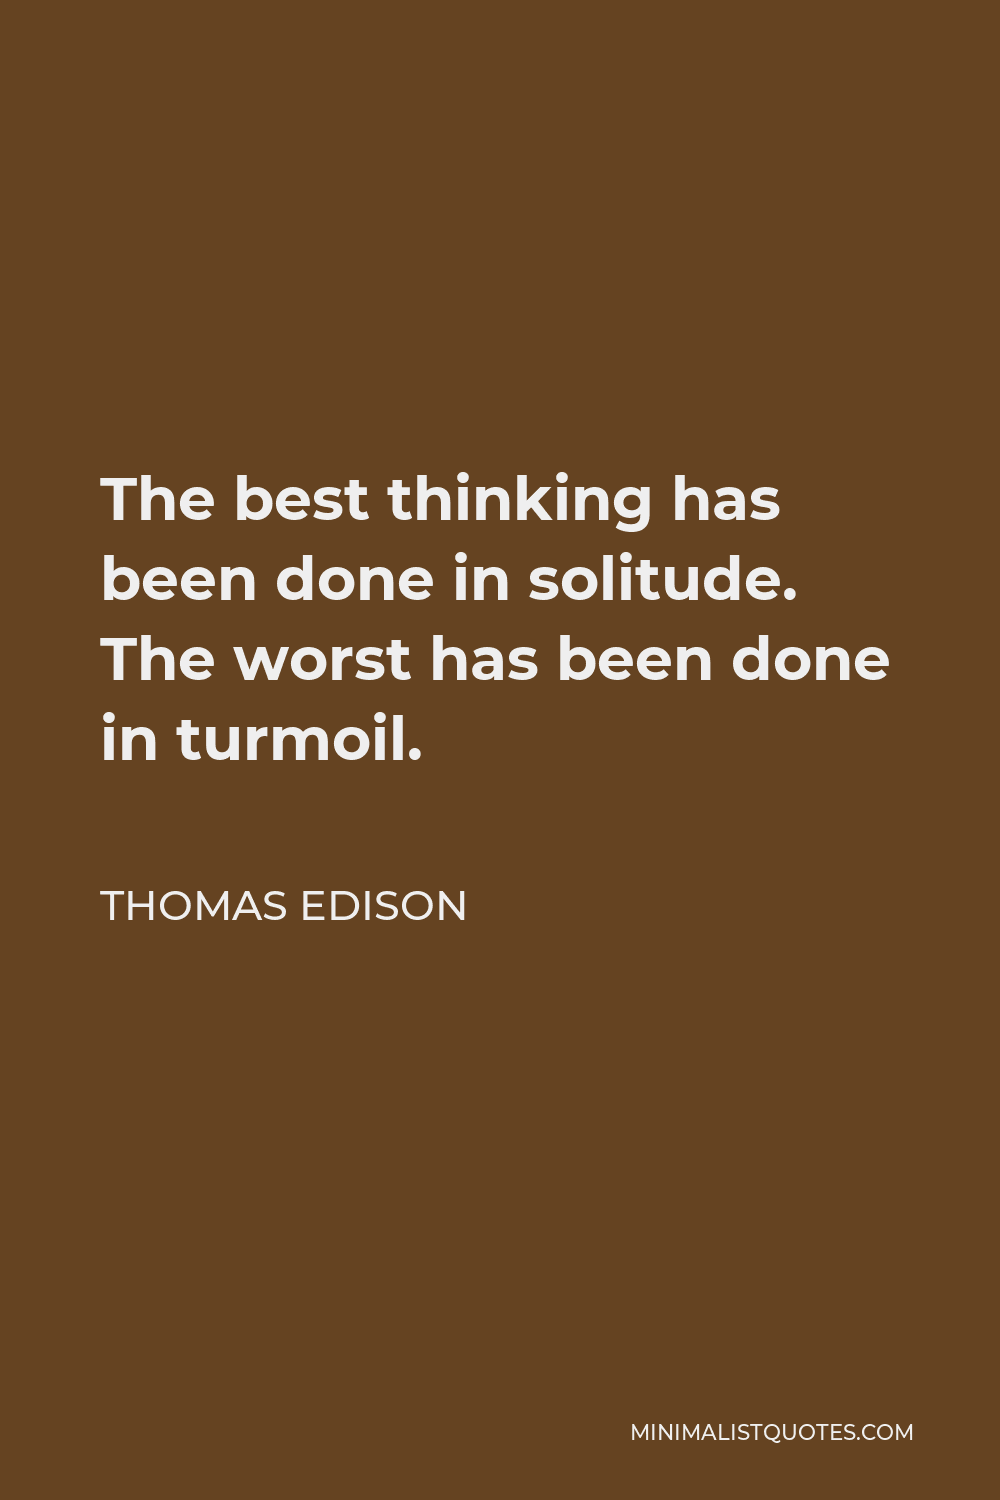 Thomas Edison Quote - The best thinking has been done in solitude. The worst has been done in turmoil.